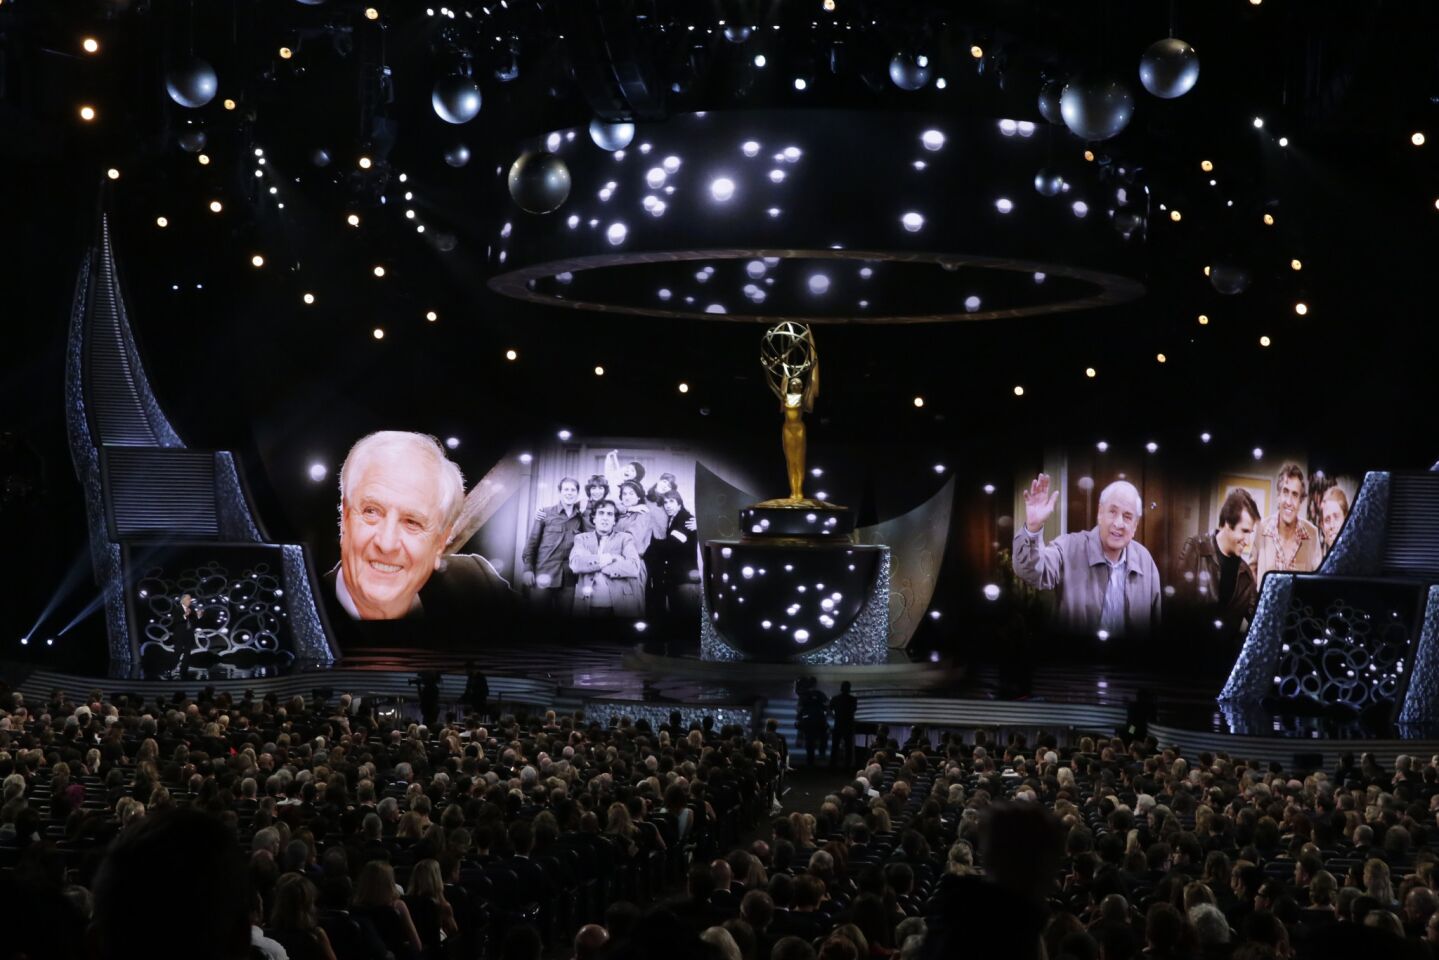 The 'In memoriam' sequence shows Gary Marshall during the show at the 68th Primetime Emmy Awards.